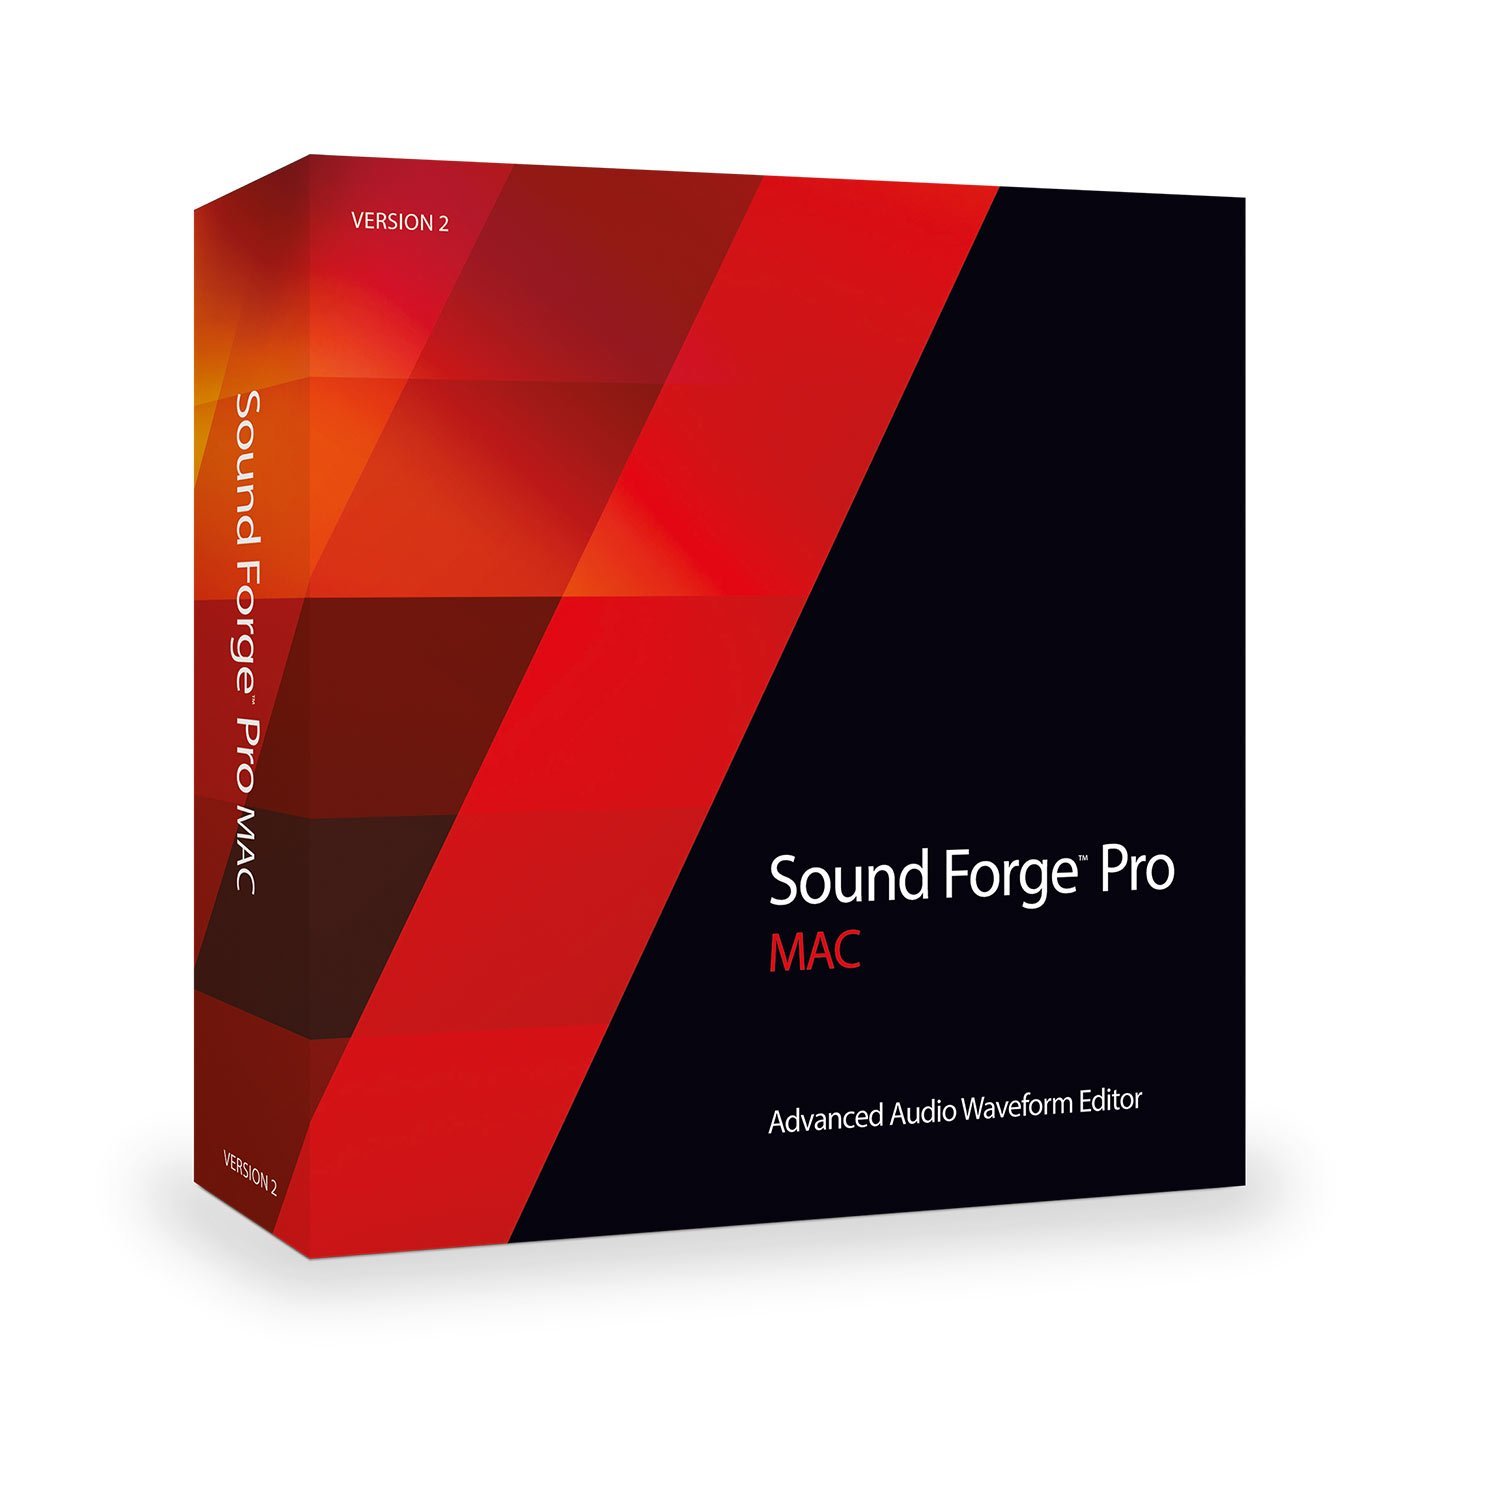 sony sound forge 9.0 free download with serial key